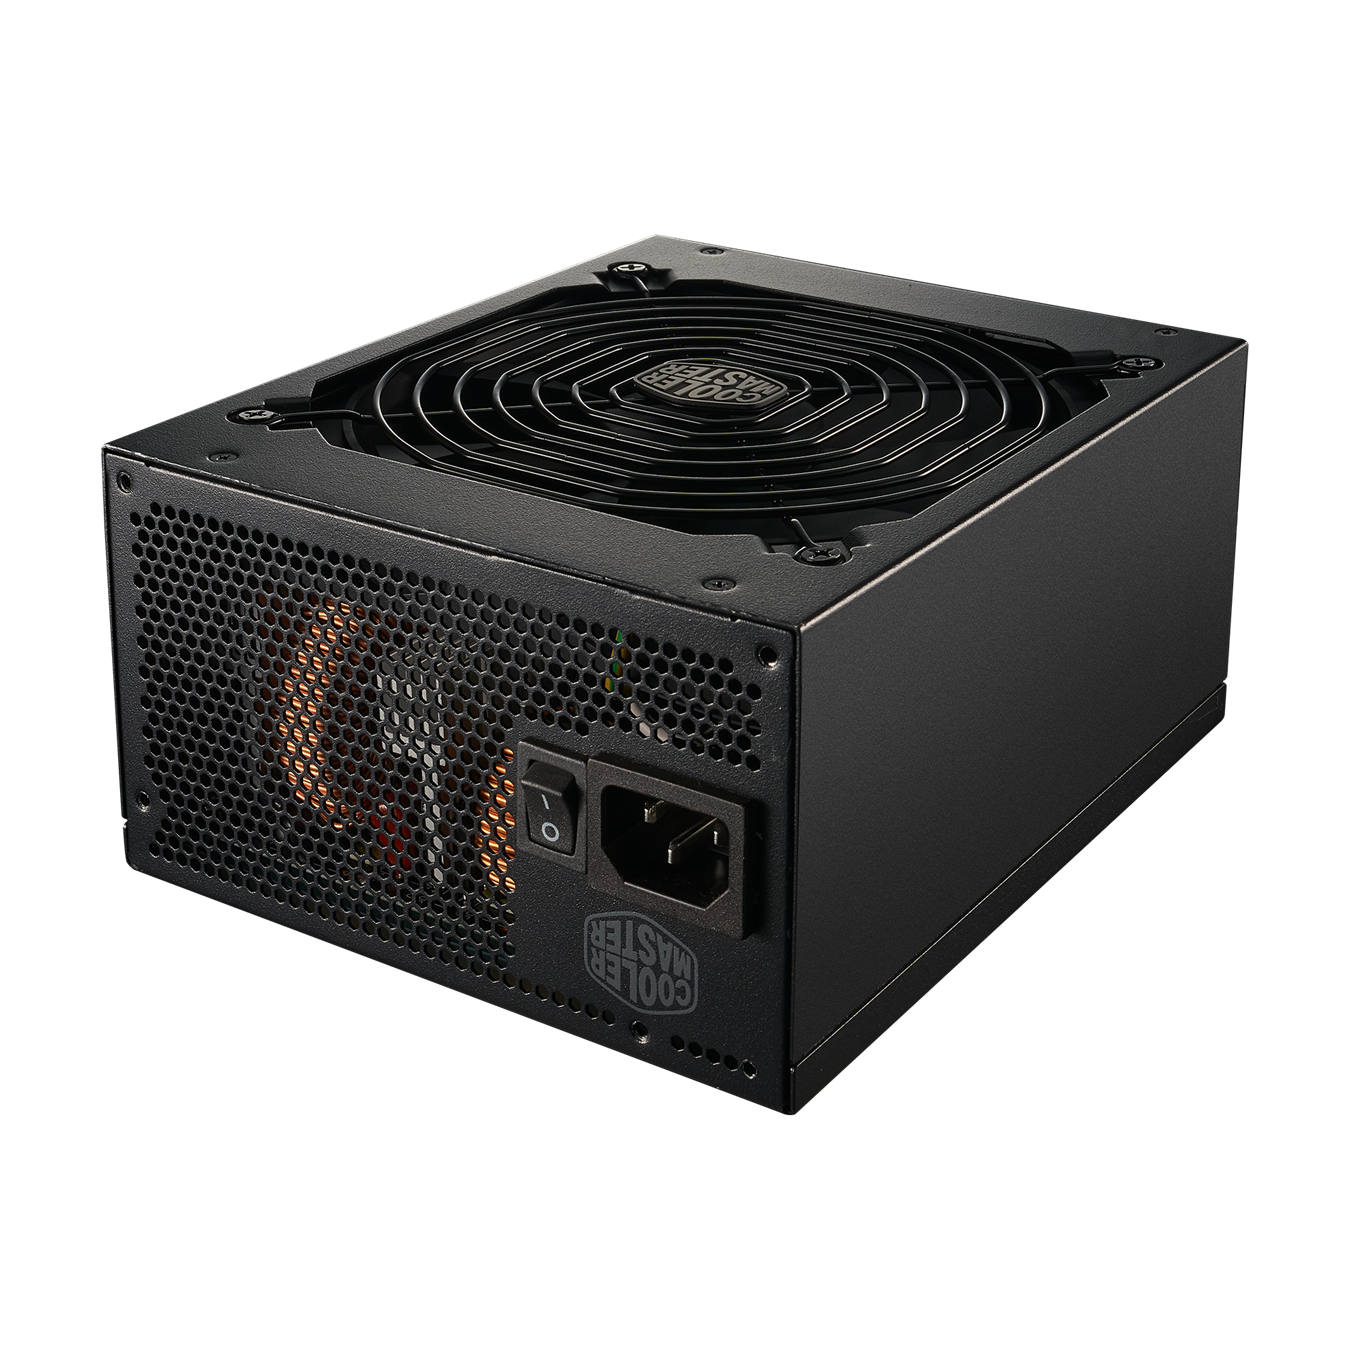 GX Gold 1250 is designed to fully support net-generation CPU & GPU platforms.